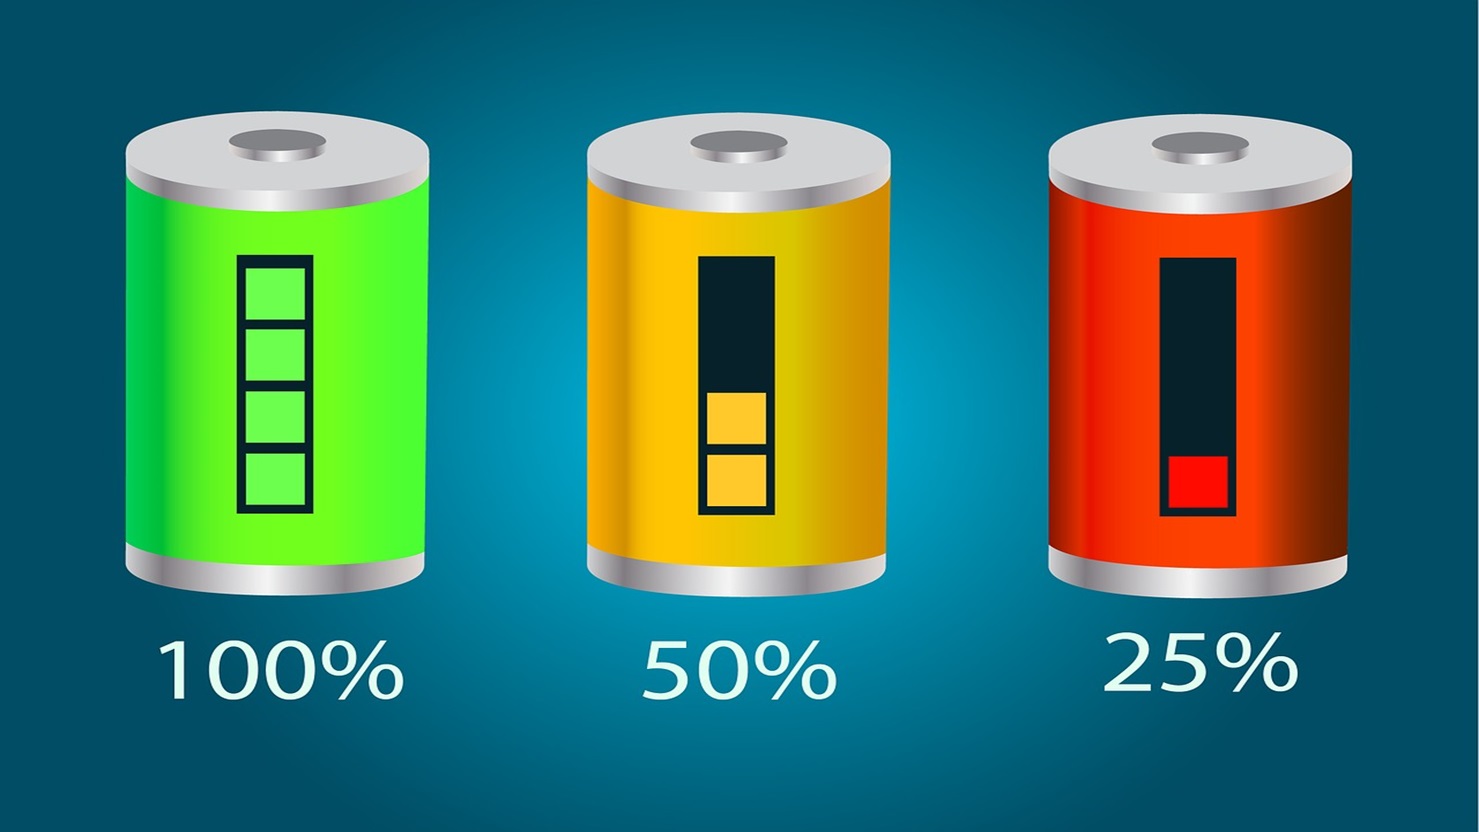 Deciphering Battery Performance: Not All 100Ah Batteries Are Created Equal